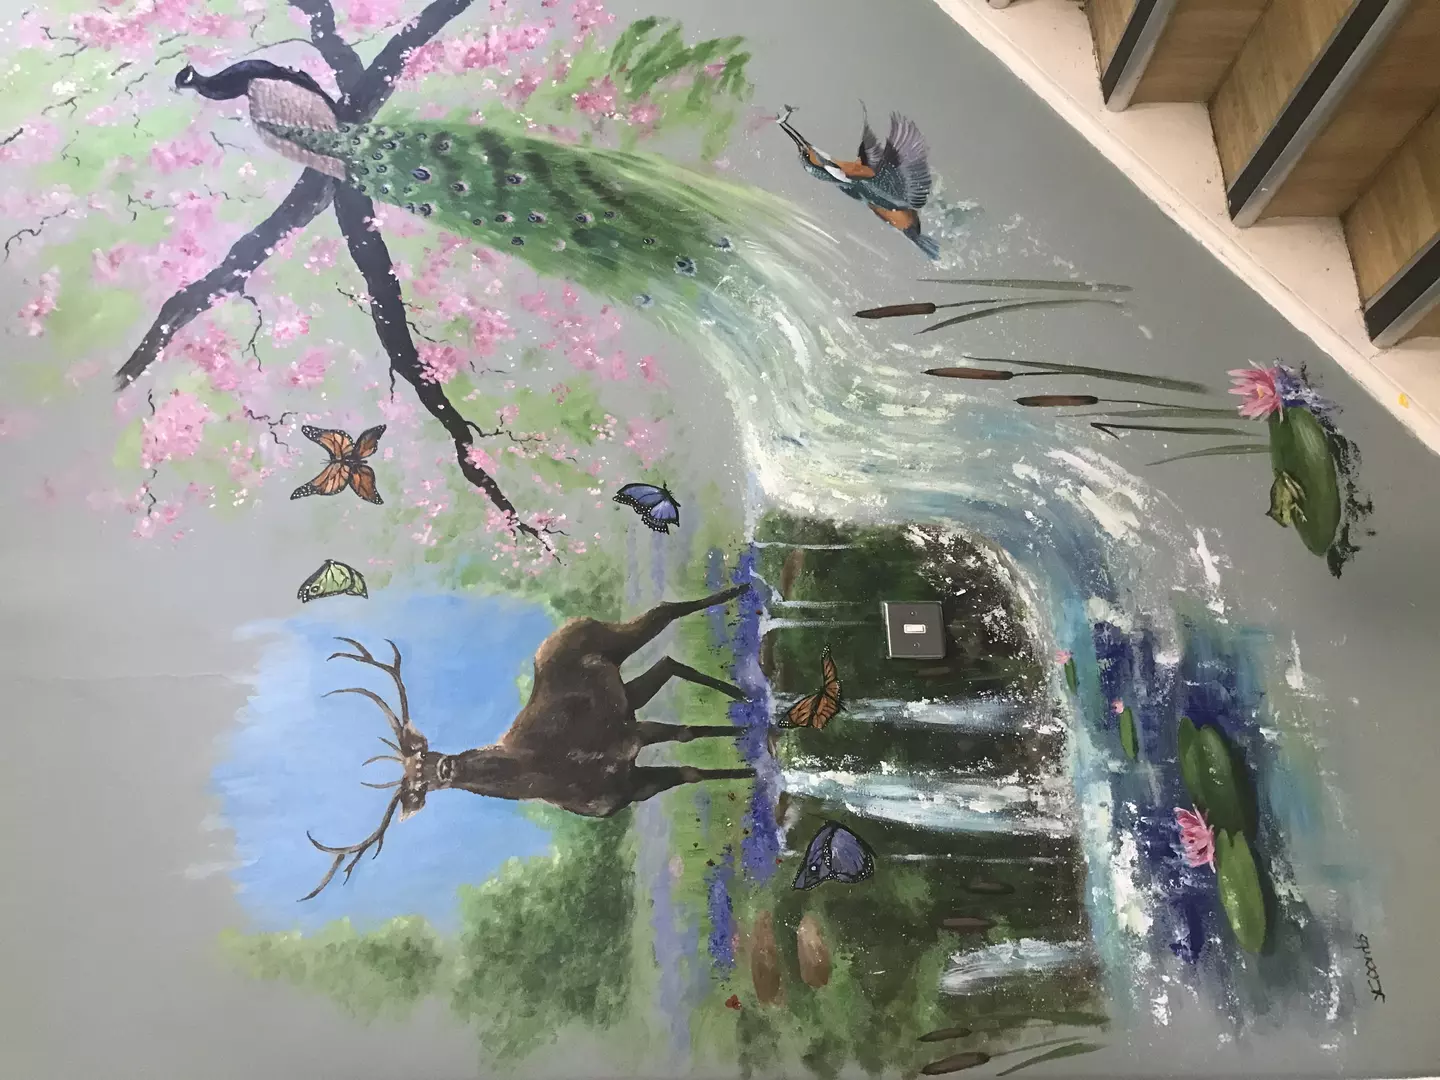 A painting of nature and wildlife, with a peacock perched in a tree and a stag stood in front of a stream.